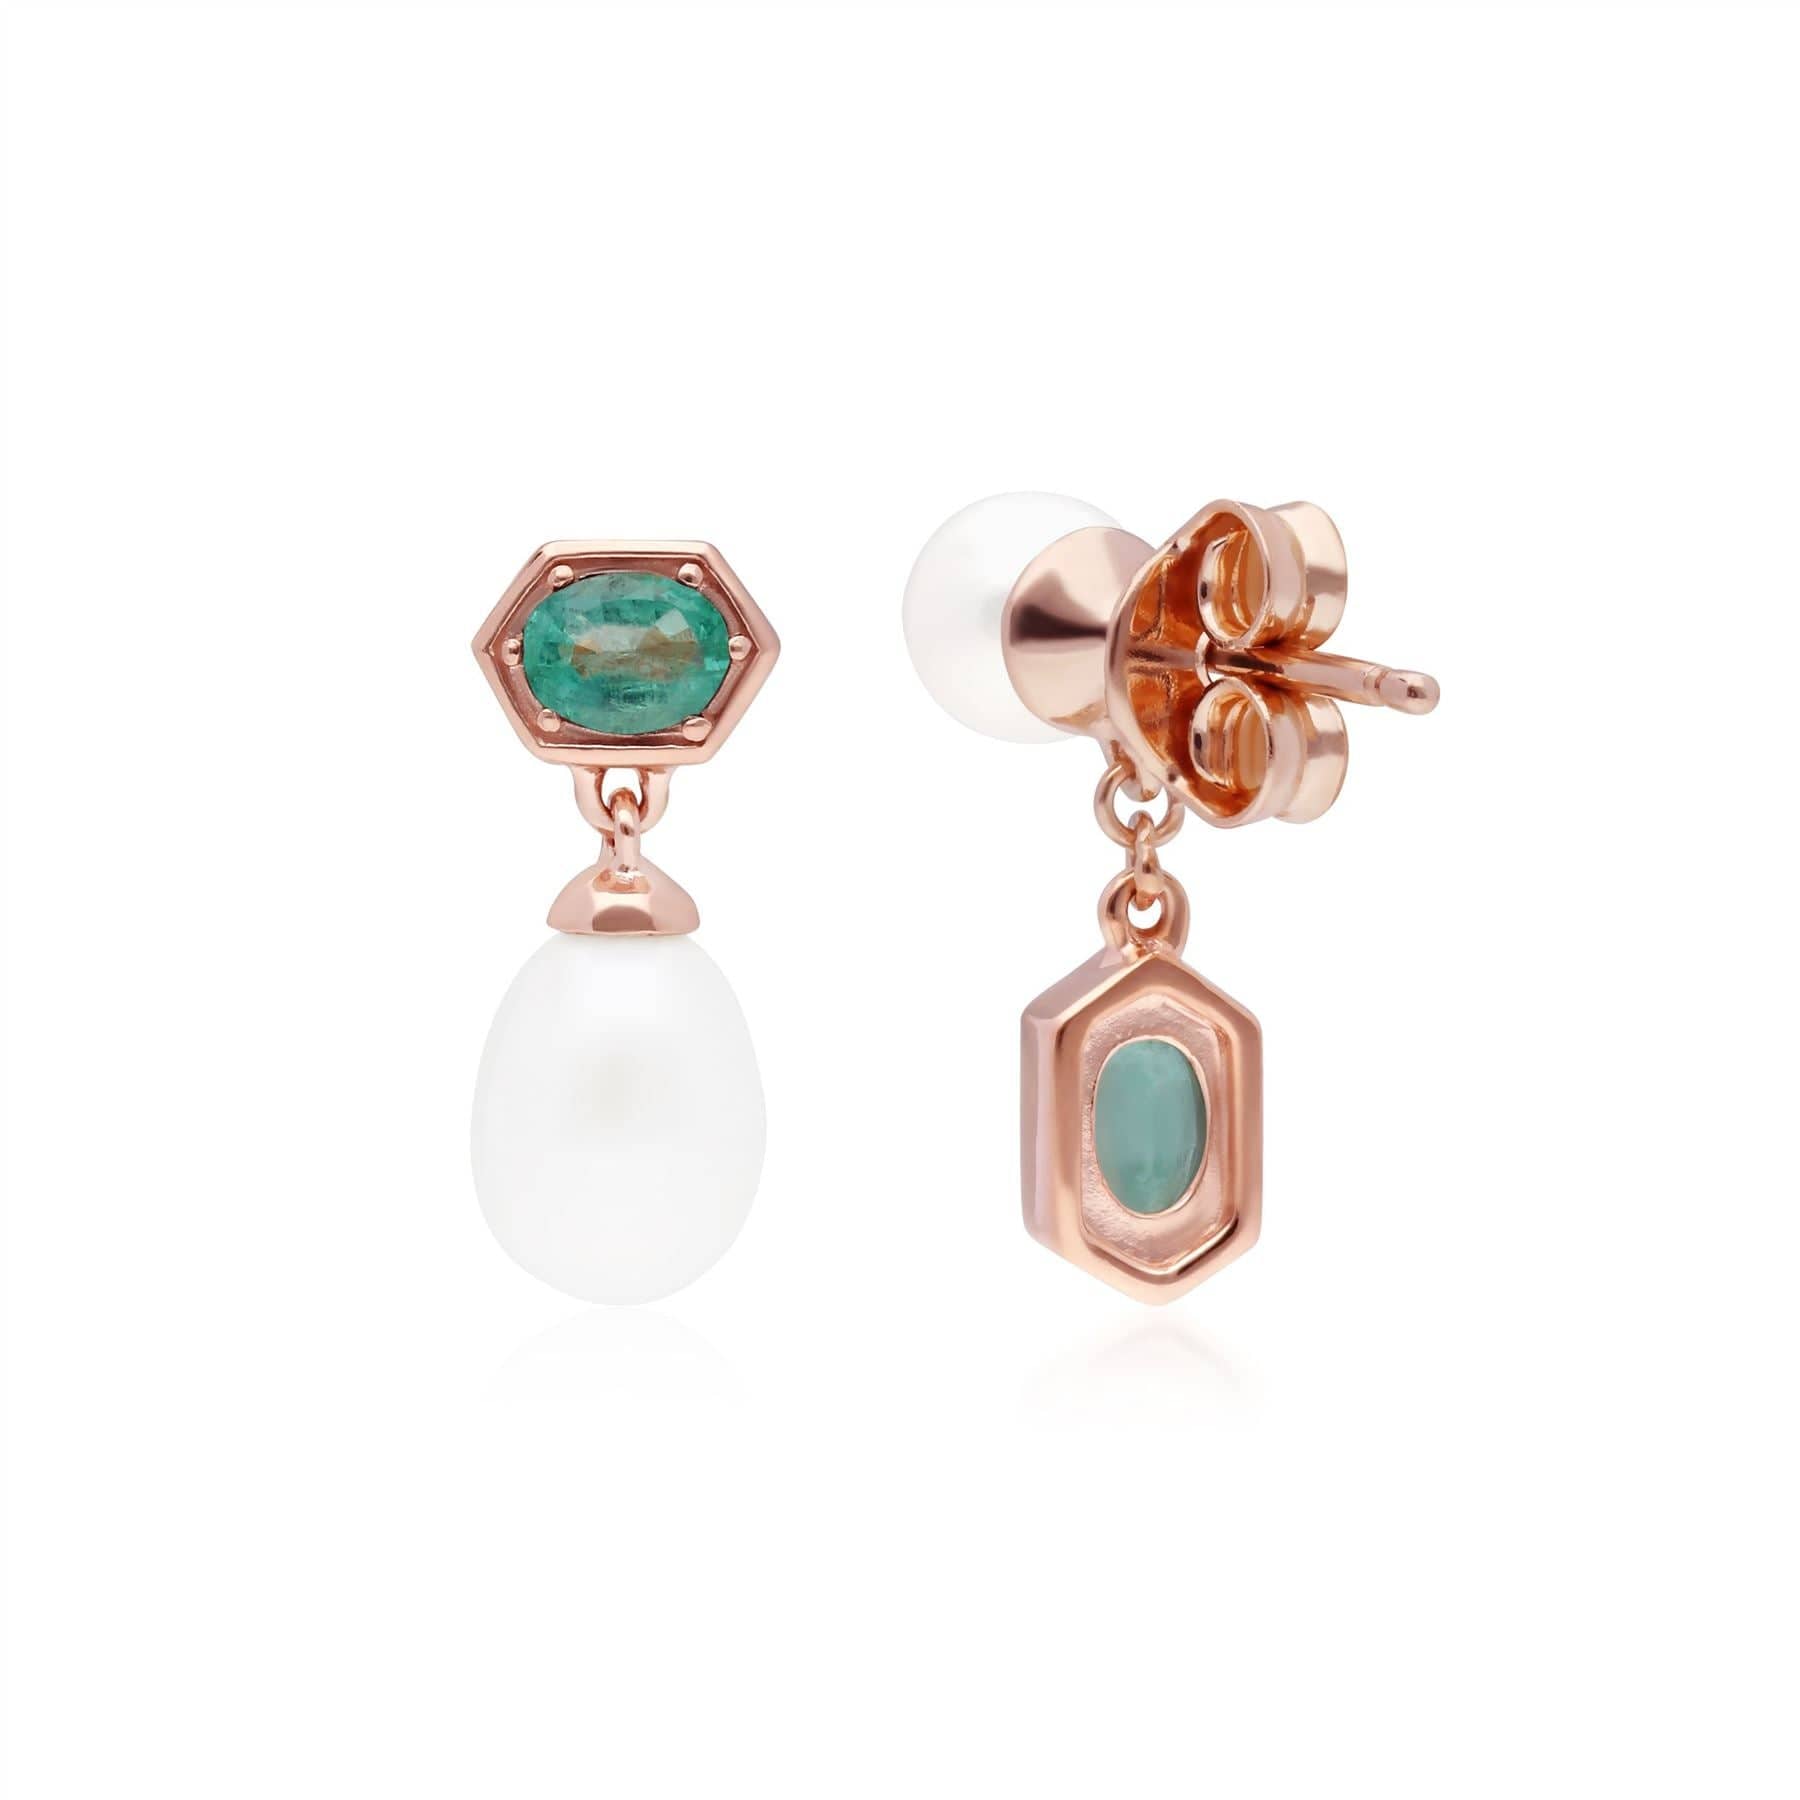 Modern Pearl & Emerald Mismatched Drop Earrings in Rose Gold Plated Silver - Gemondo